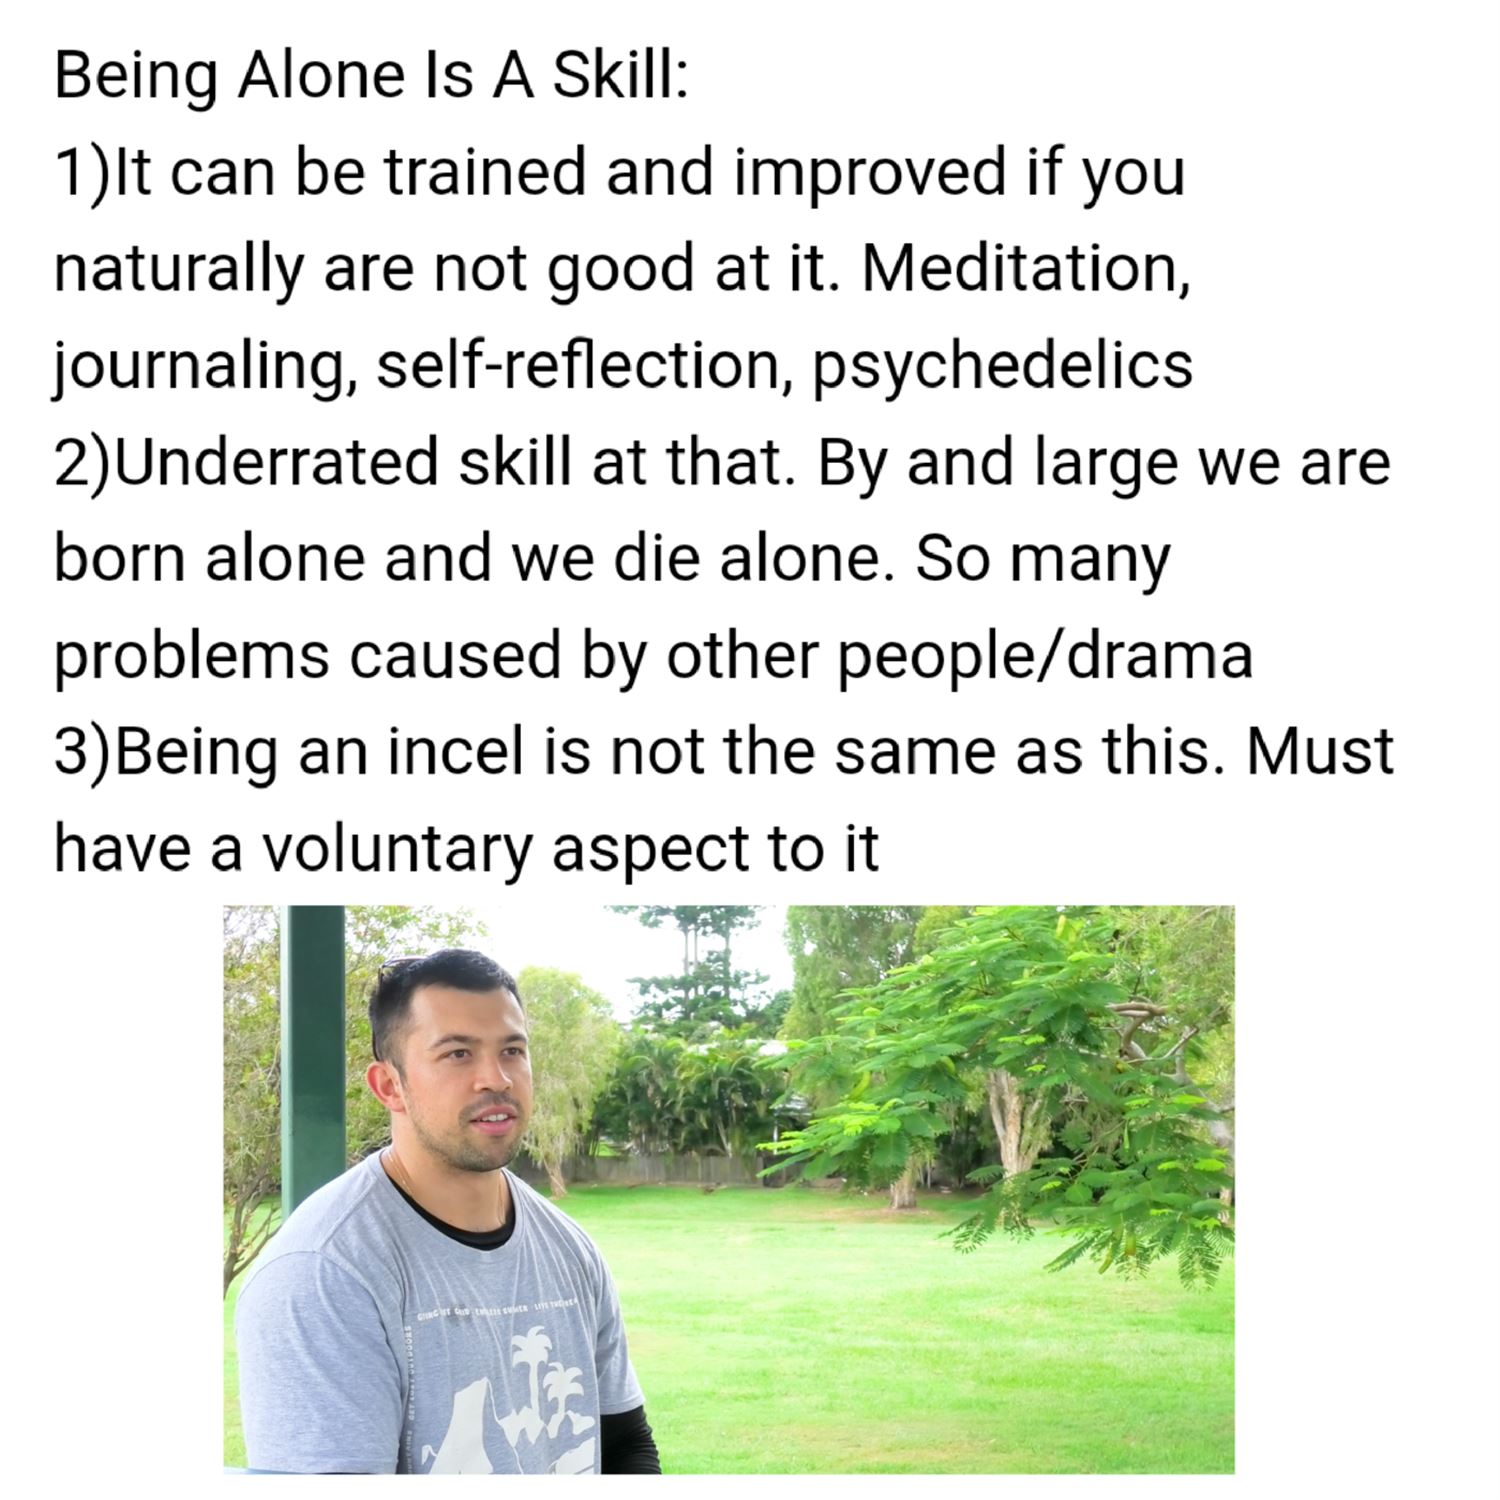 Being alone is a skill